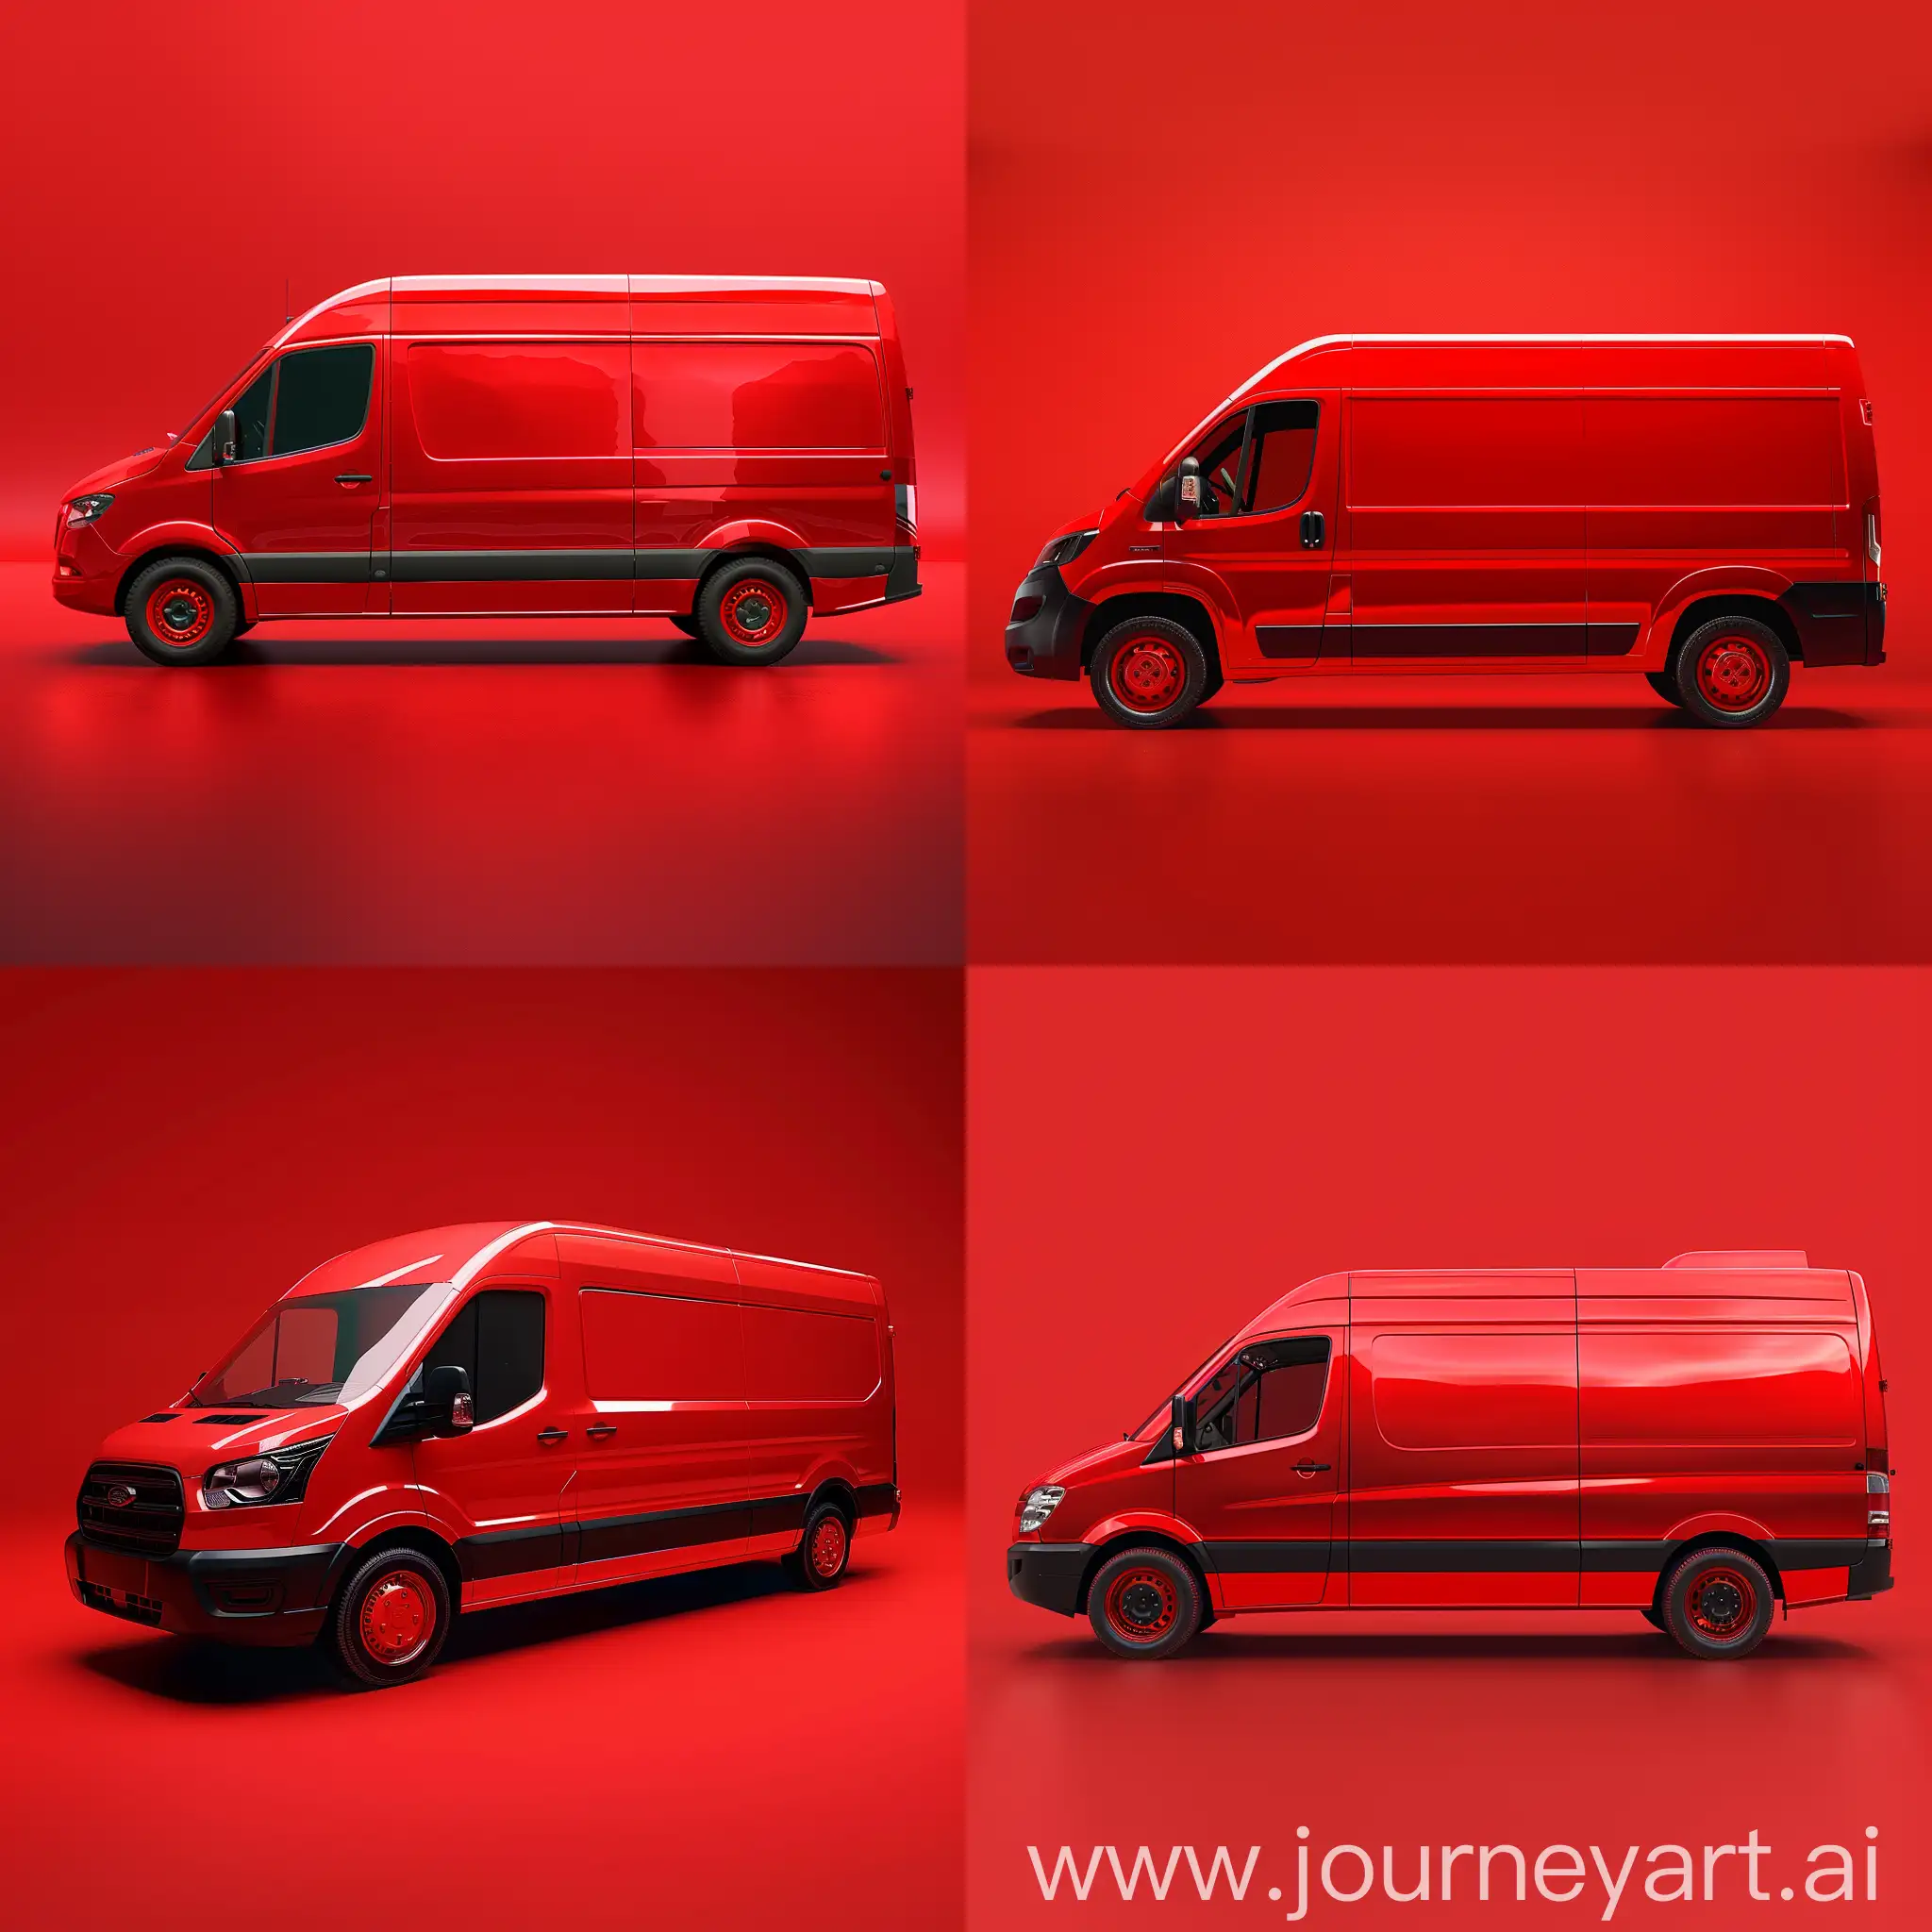 Create an ultrarealistic photograph of a clean and shiny bright red cargo van against a solid red background. The van should be a modern commercial delivery vehicle with a boxy and functional design. Render the image with intricate details, realistic lighting, and photographic quality textures. The lighting should make the van's metallic surfaces gleam and reflect the uniform red backdrop. The overall scene should have a minimalist composition focusing solely on the vibrant red cargo van against the solid red background.